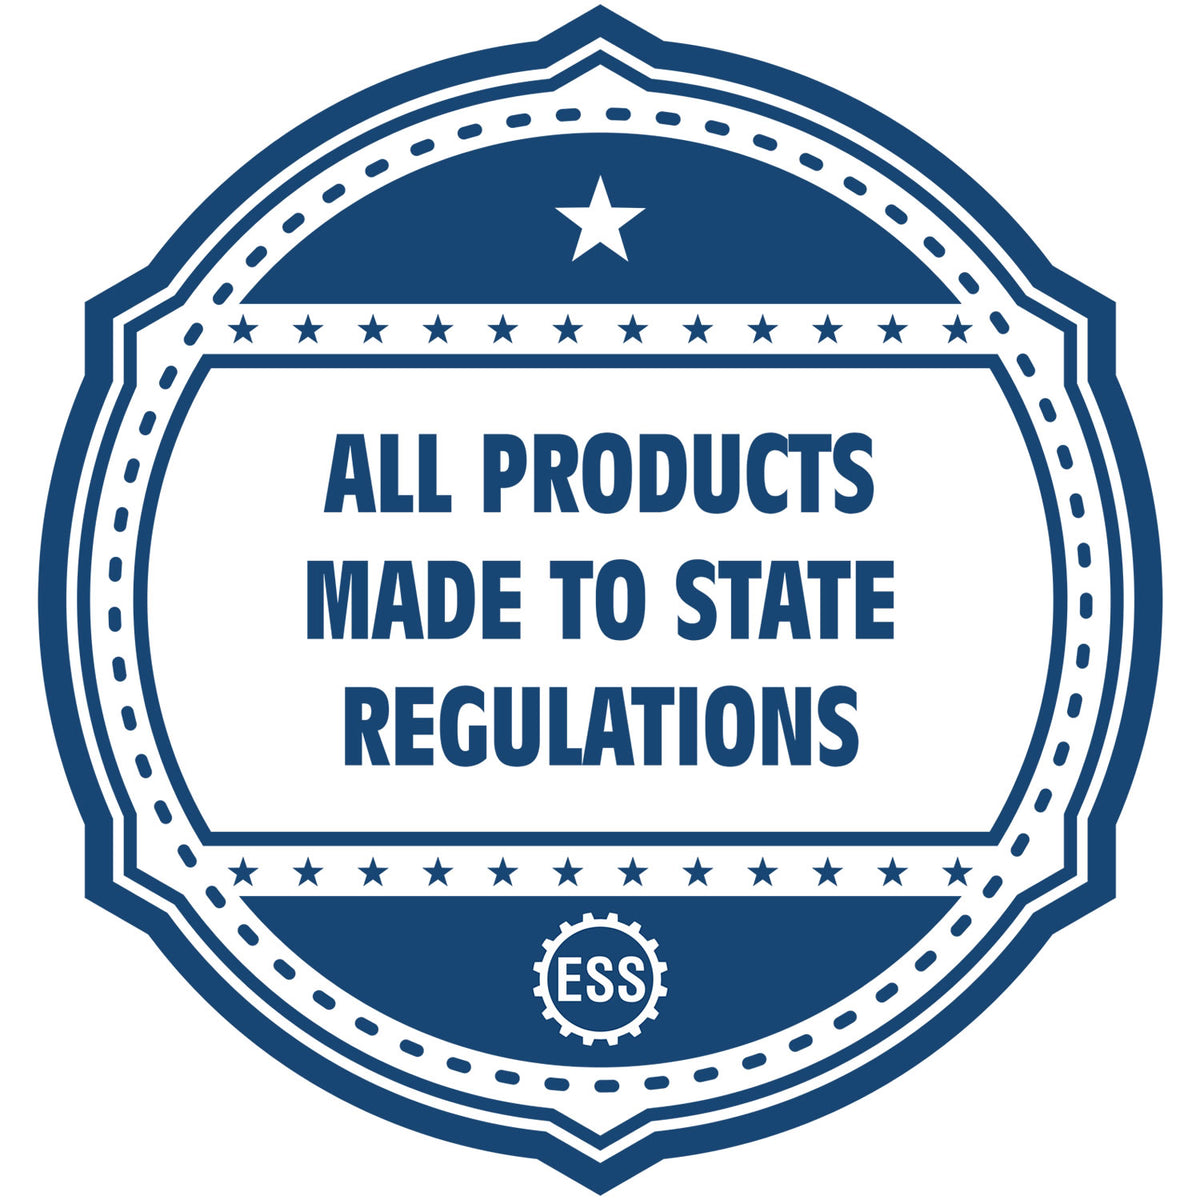 A blue icon or badge for the Ohio Geologist Desk Seal showing that this product is made in compliance with state regulations.